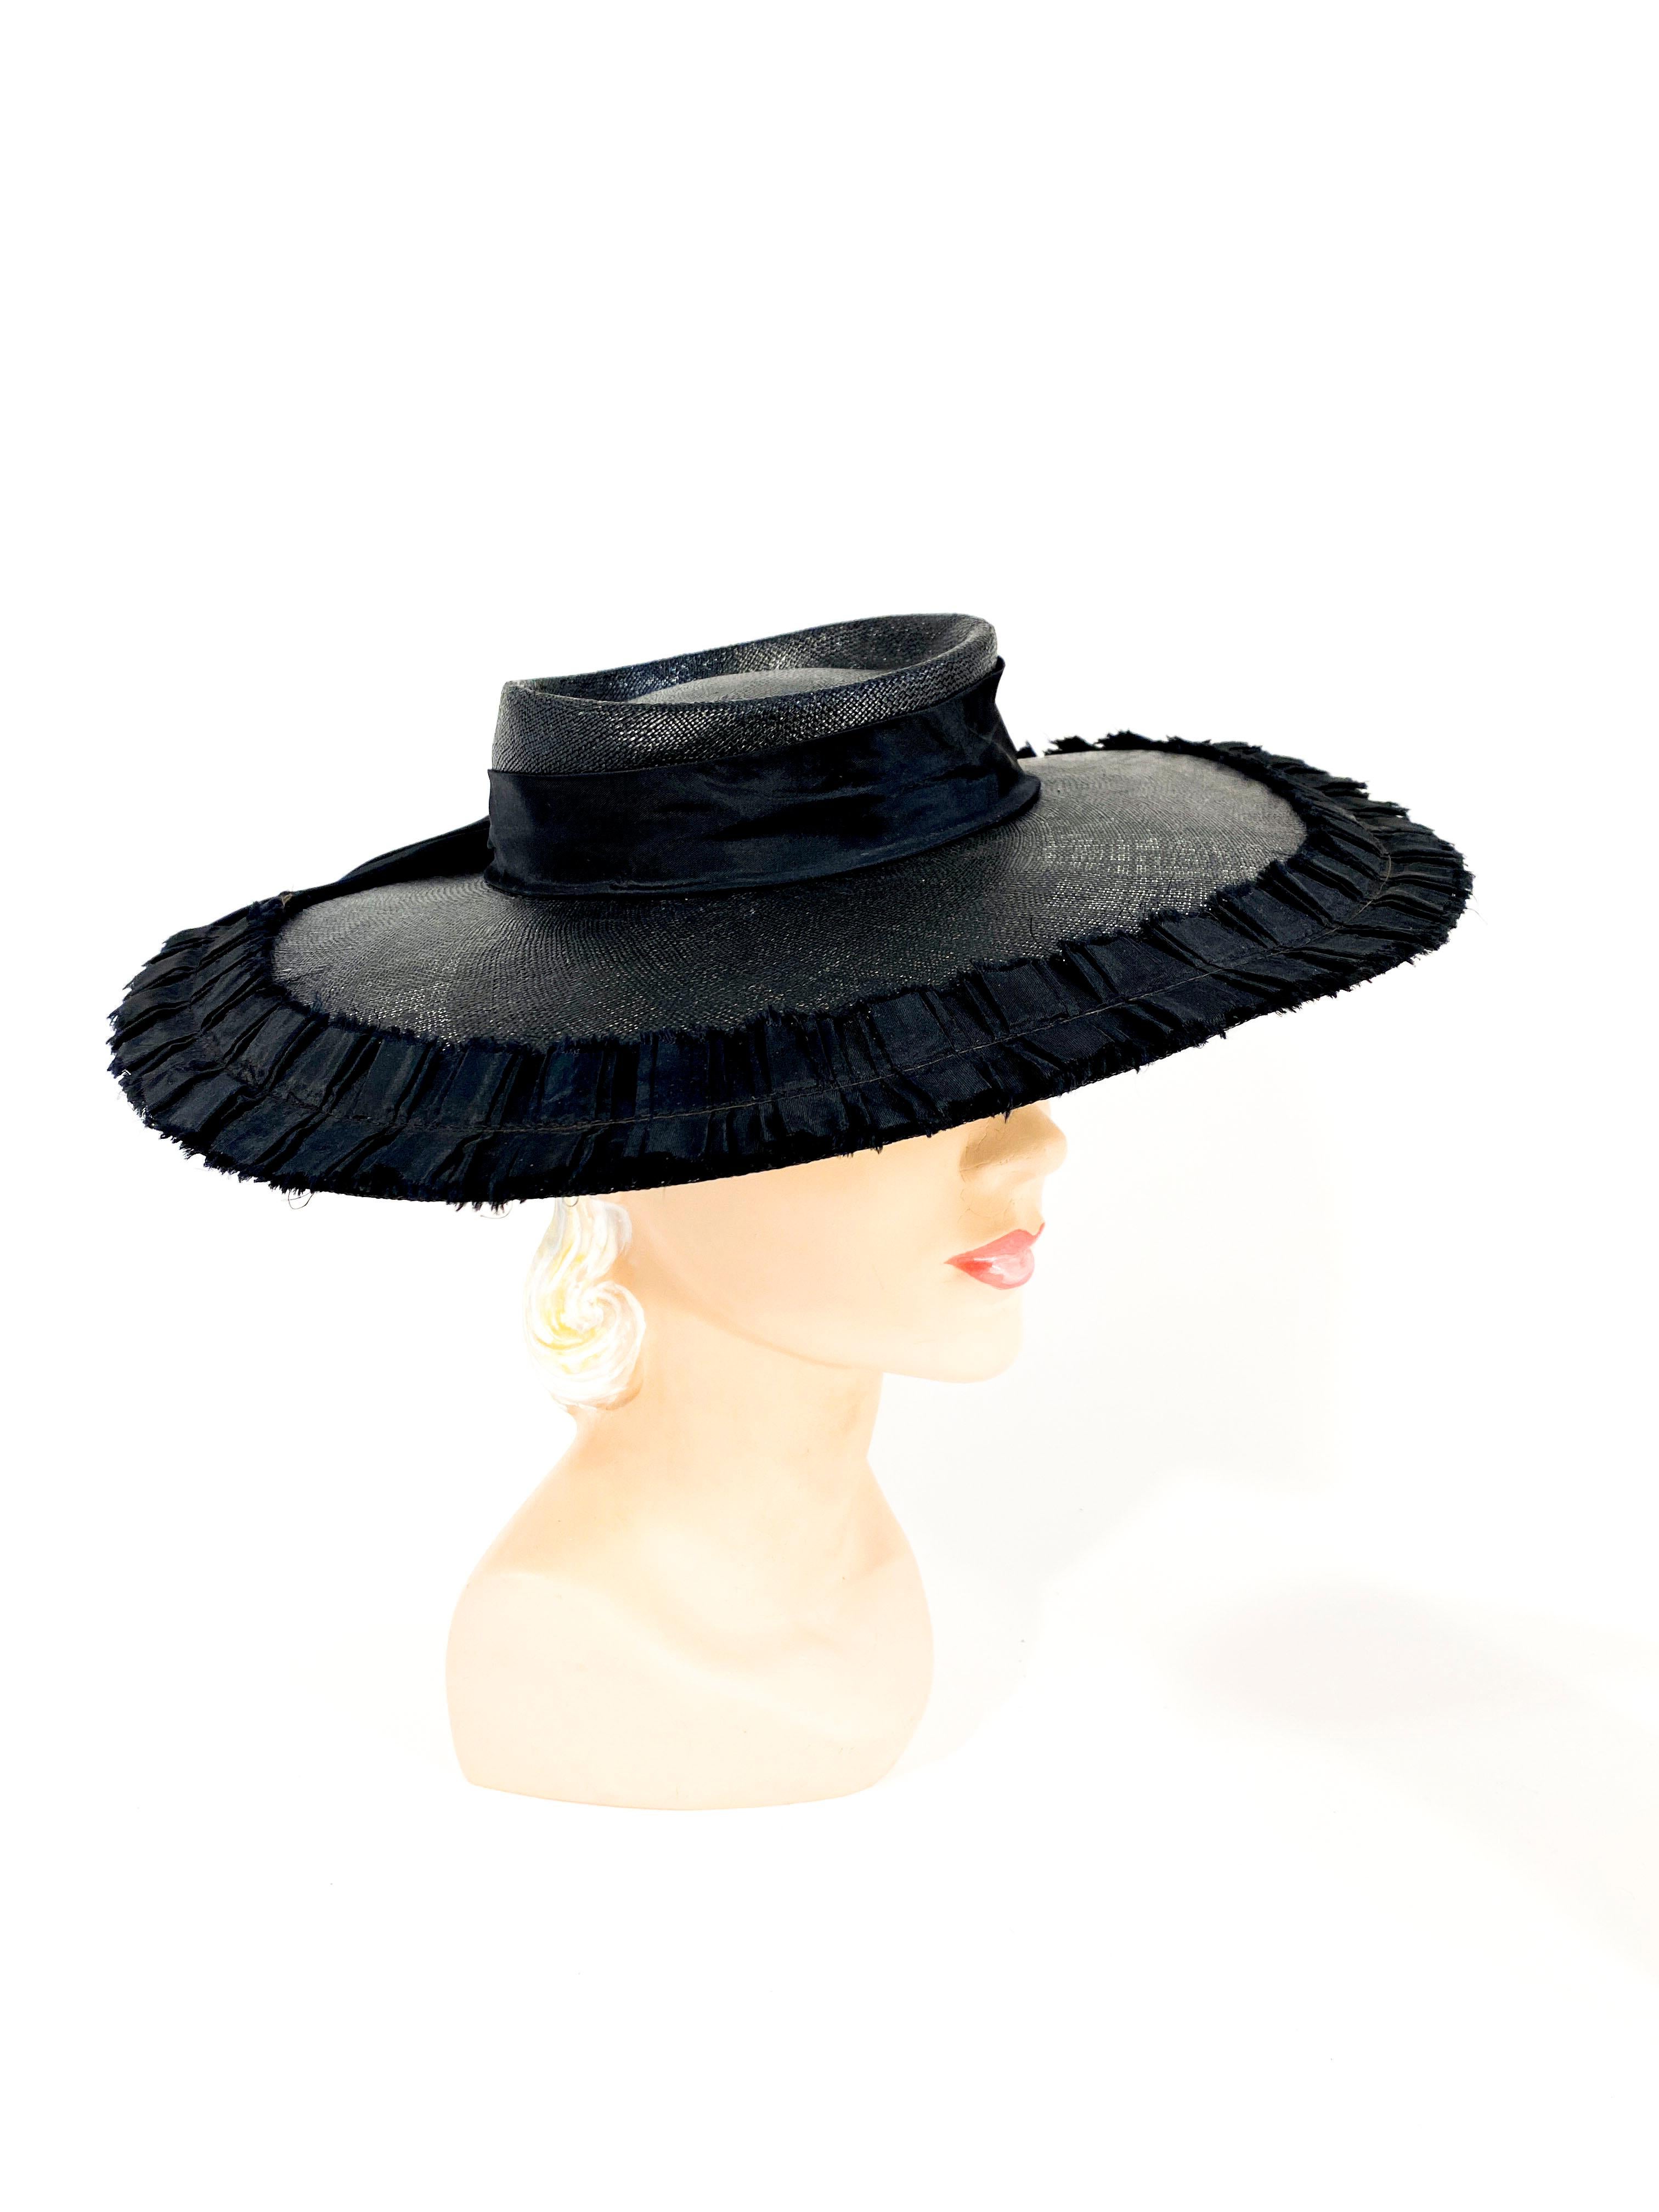 1940s black coated woven straw hat with a wide brim boarded with a black taffeta pleated trim. The shallow crown has a decorative black twill band. The wide grosgrain security band is attached to the interior of the hat and worn on the back of the